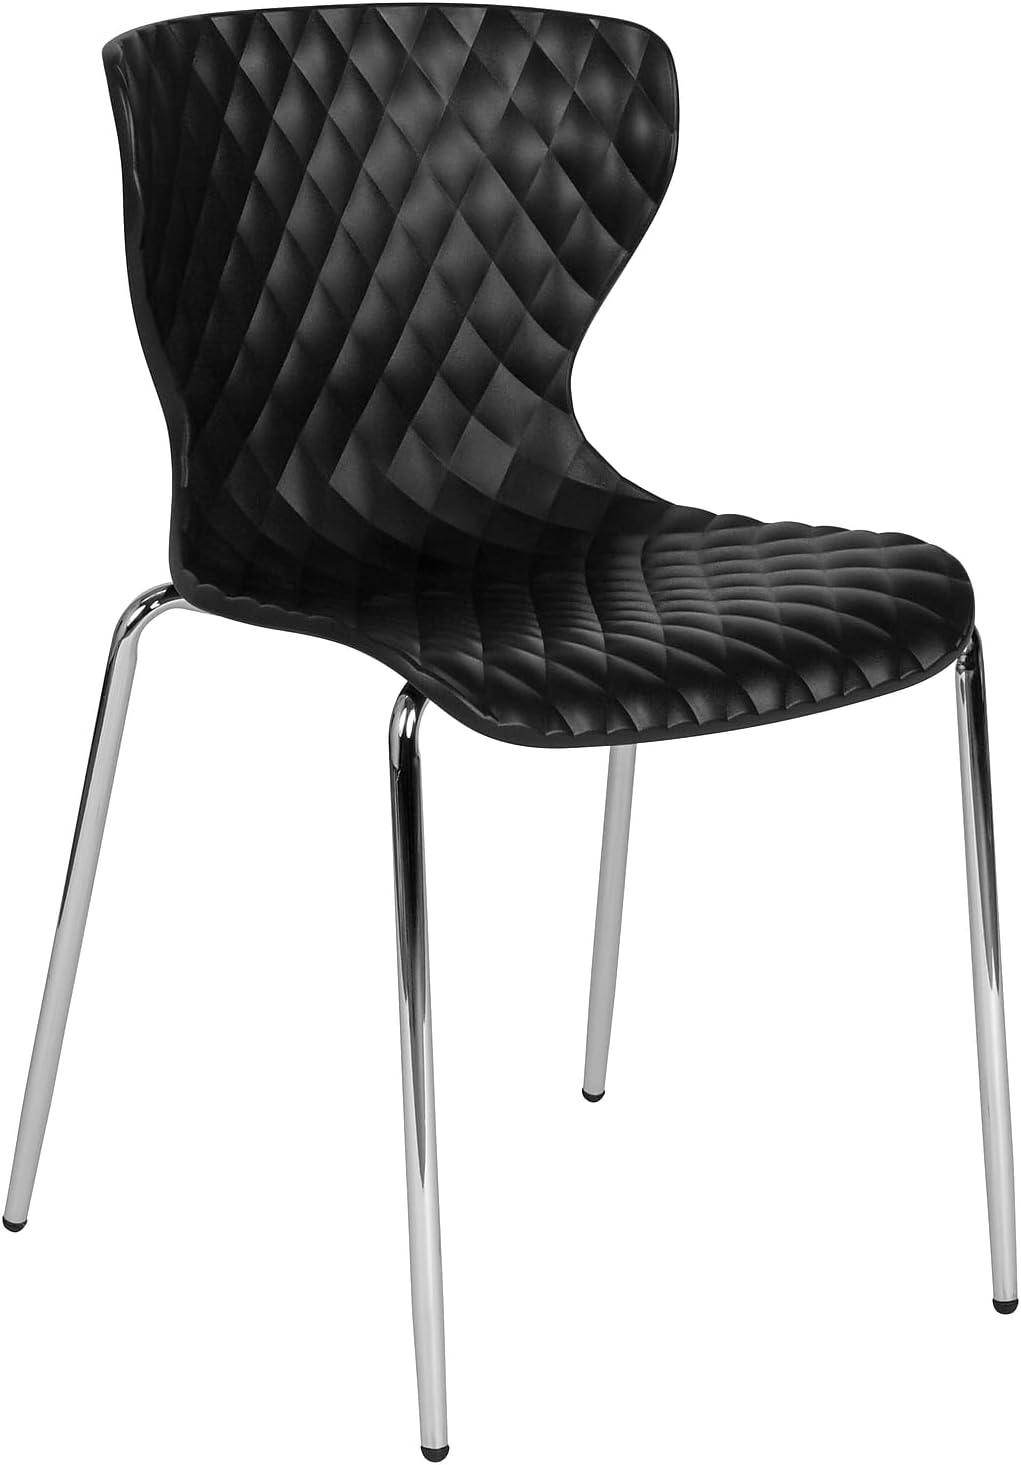 Lowell Black Metal Diamond Quilted Stackable Chair